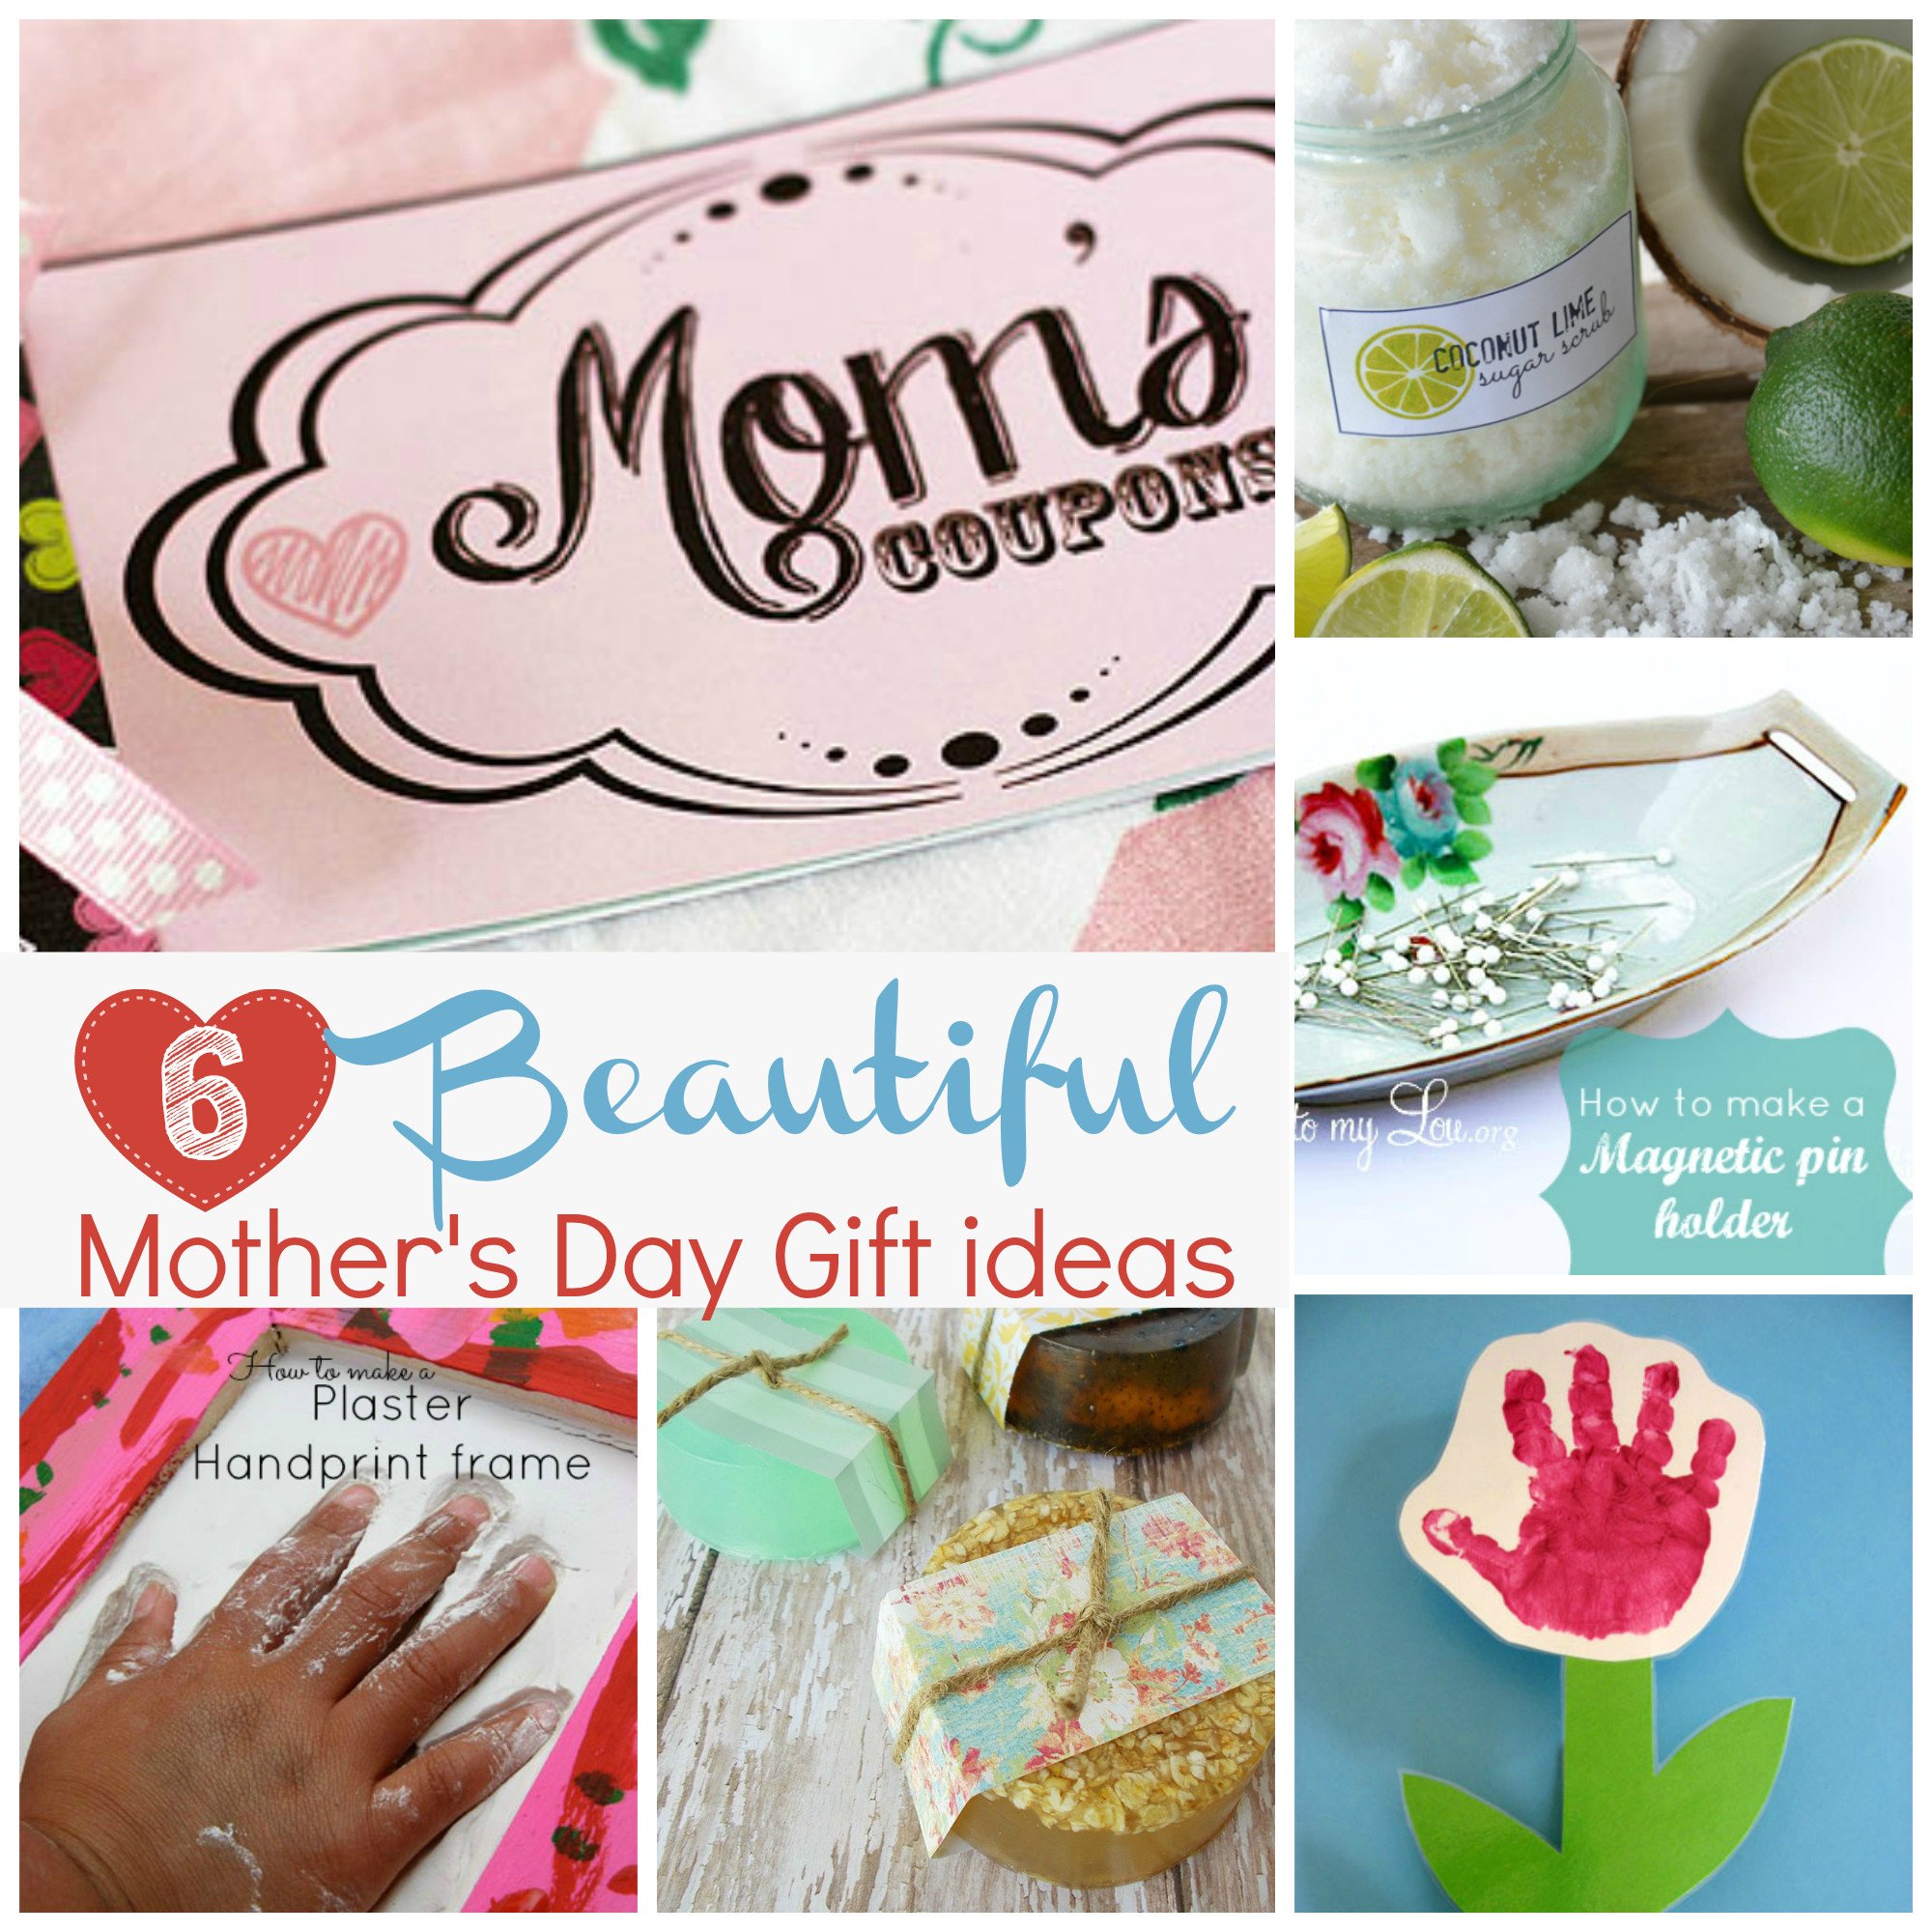 Mothers Day Gift Ideas Pinterest
 Handmade t ideas for Mother s Day